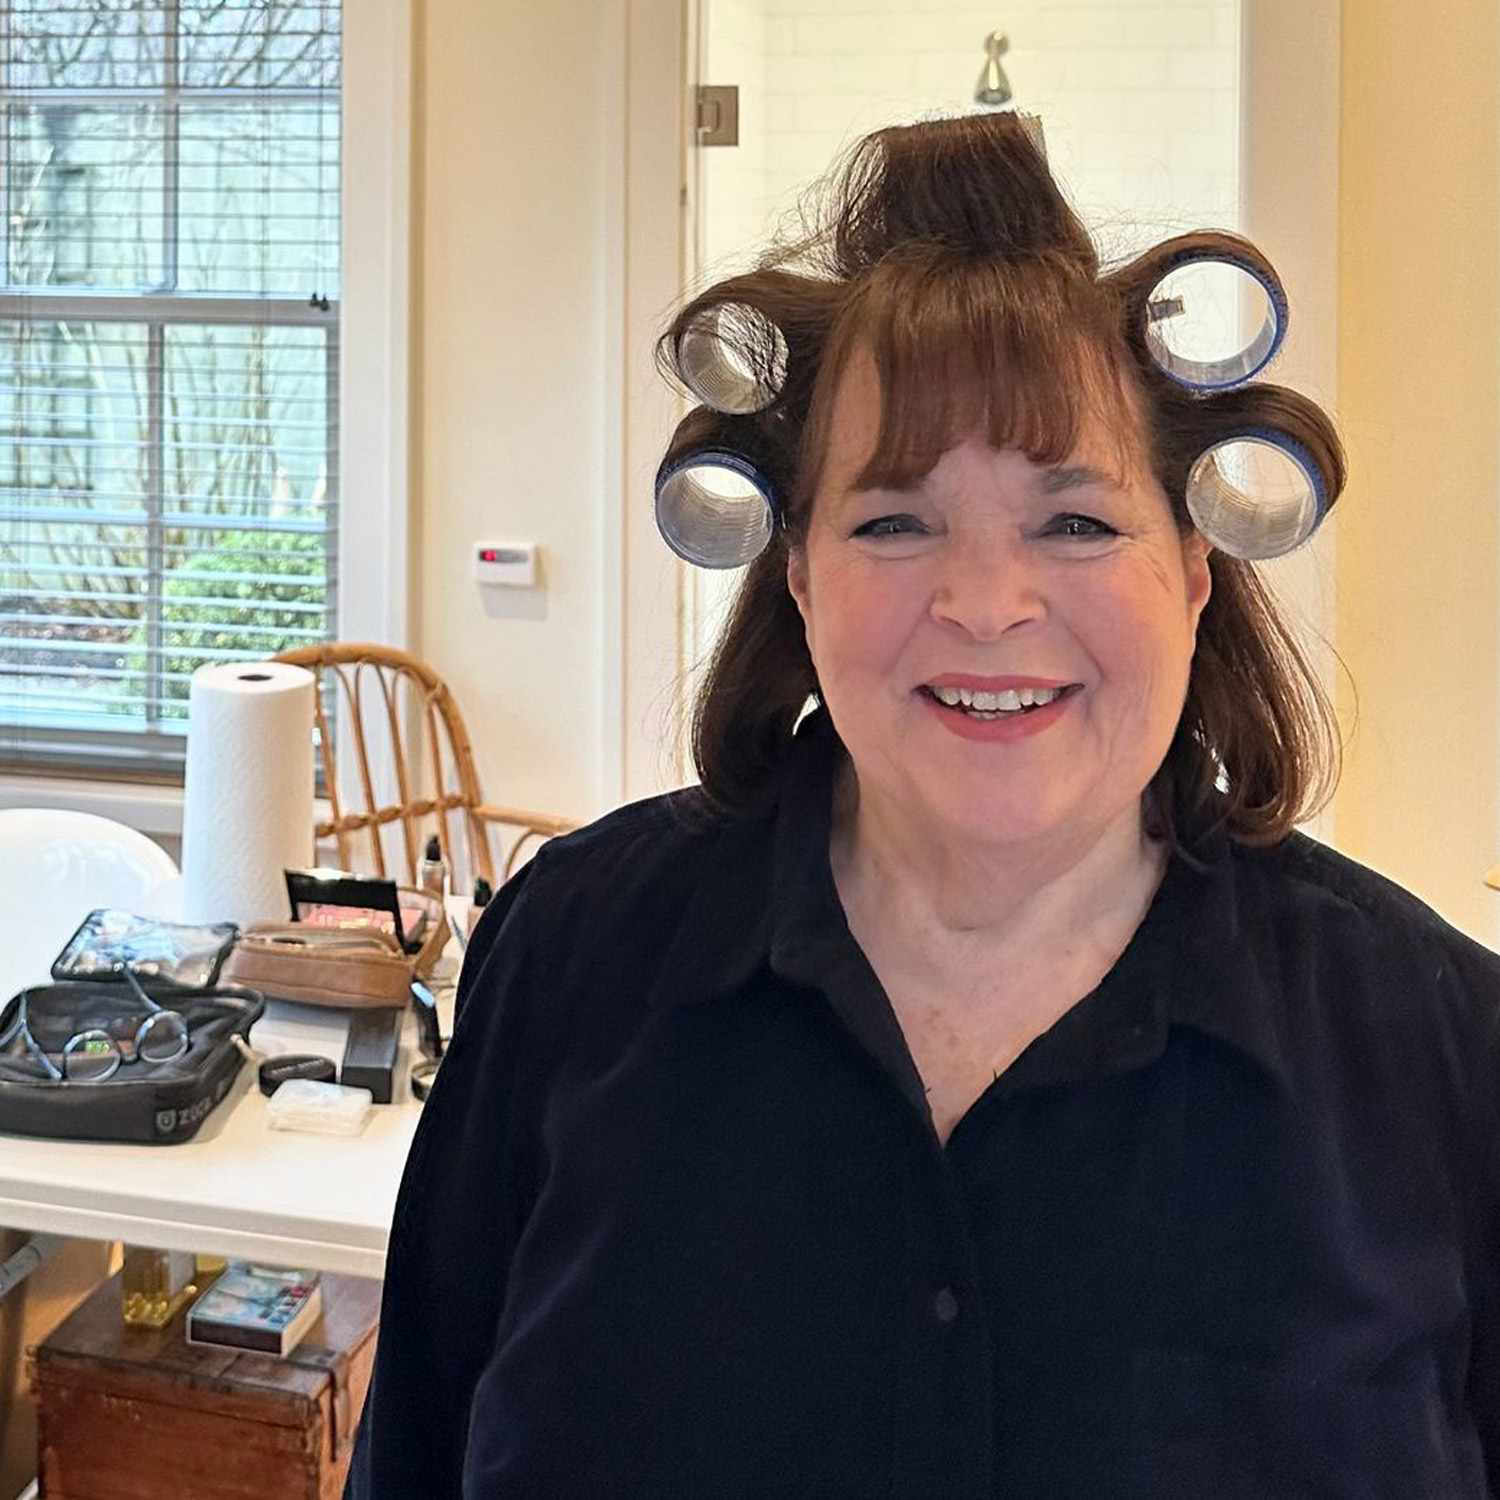 Ina Garten Shares A Glam Getting Ready Photo — With Her Hair In Rollers 